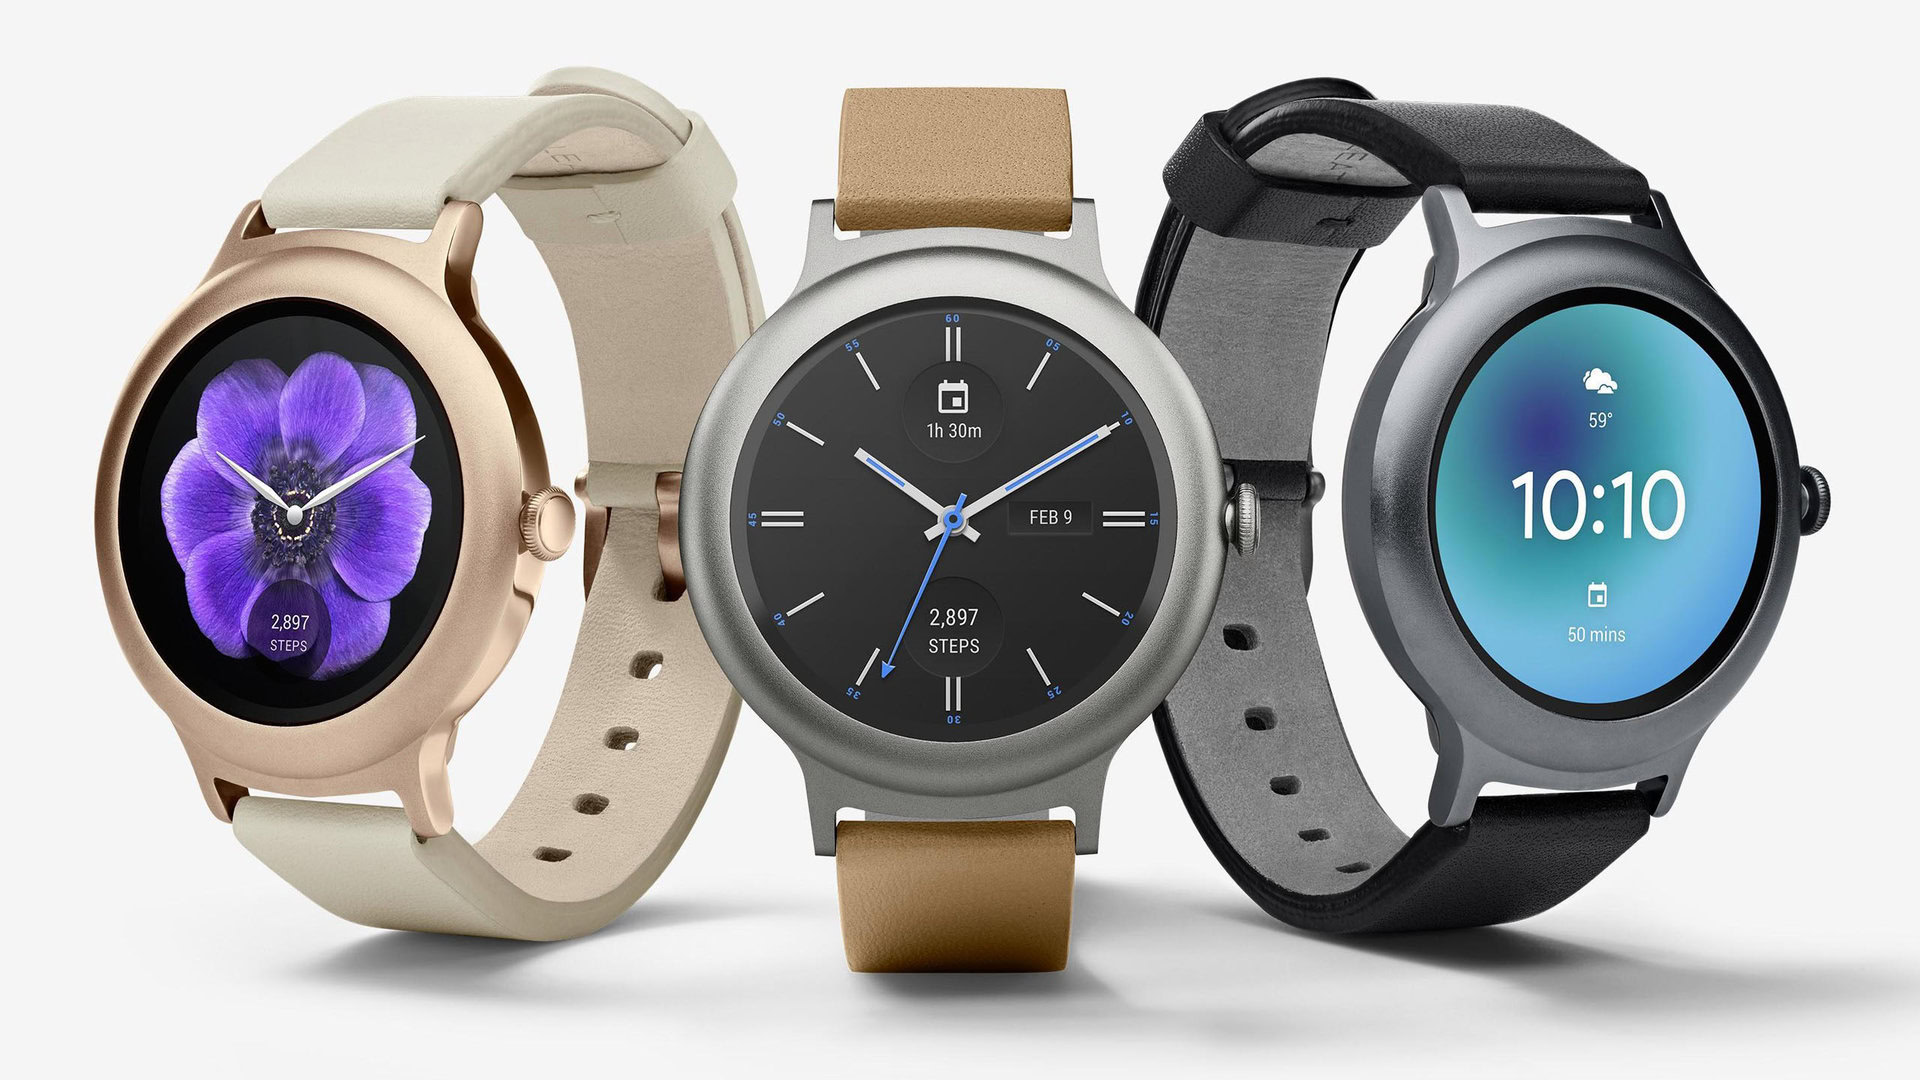 svælg illoyalitet beskytte LG Watch Sport and Watch Style smartwatches unveiled